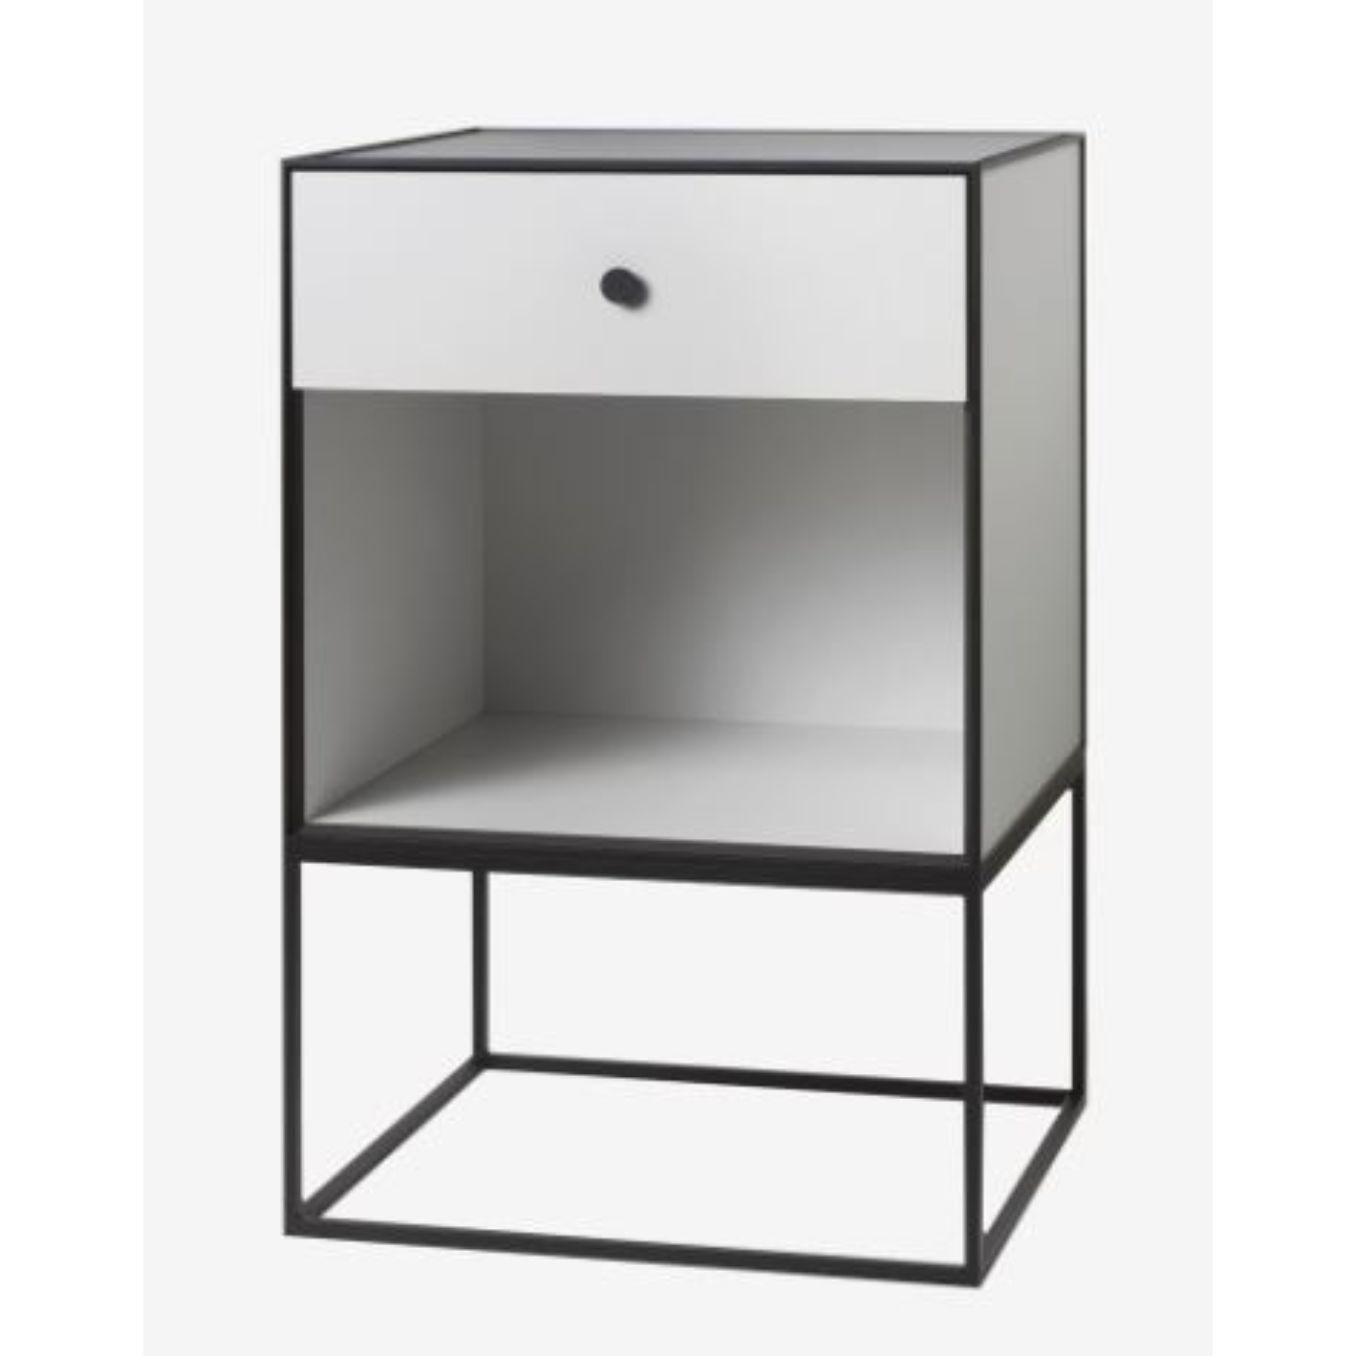 49 light grey frame sideboard with 1 drawer by Lassen
Dimensions: w 49 x d 42 x h 77 cm 
Materials: Finér, Melamin, Melamine, Metal, Veneer
Also available in different colors and dimensions.
Weight: 15.50 Kg

By Lassen is a Danish design brand